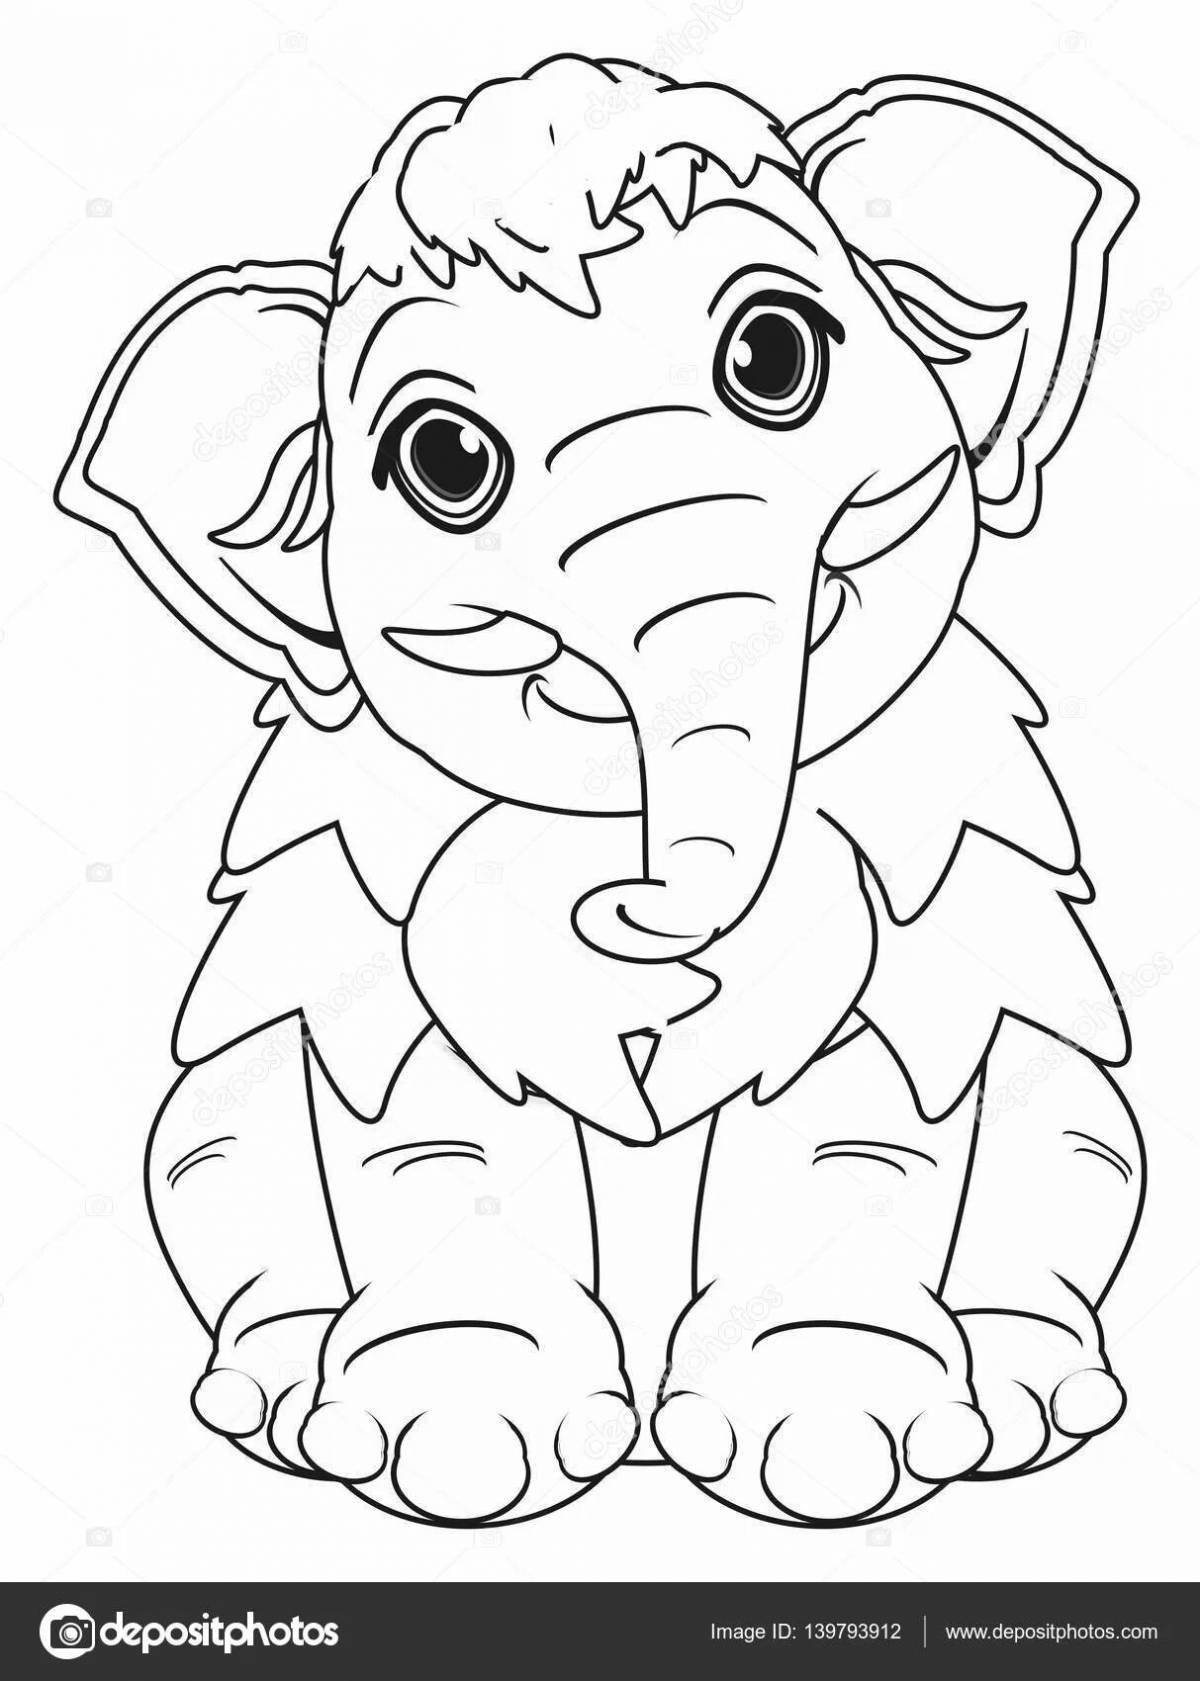 Great mammoth coloring book for kids